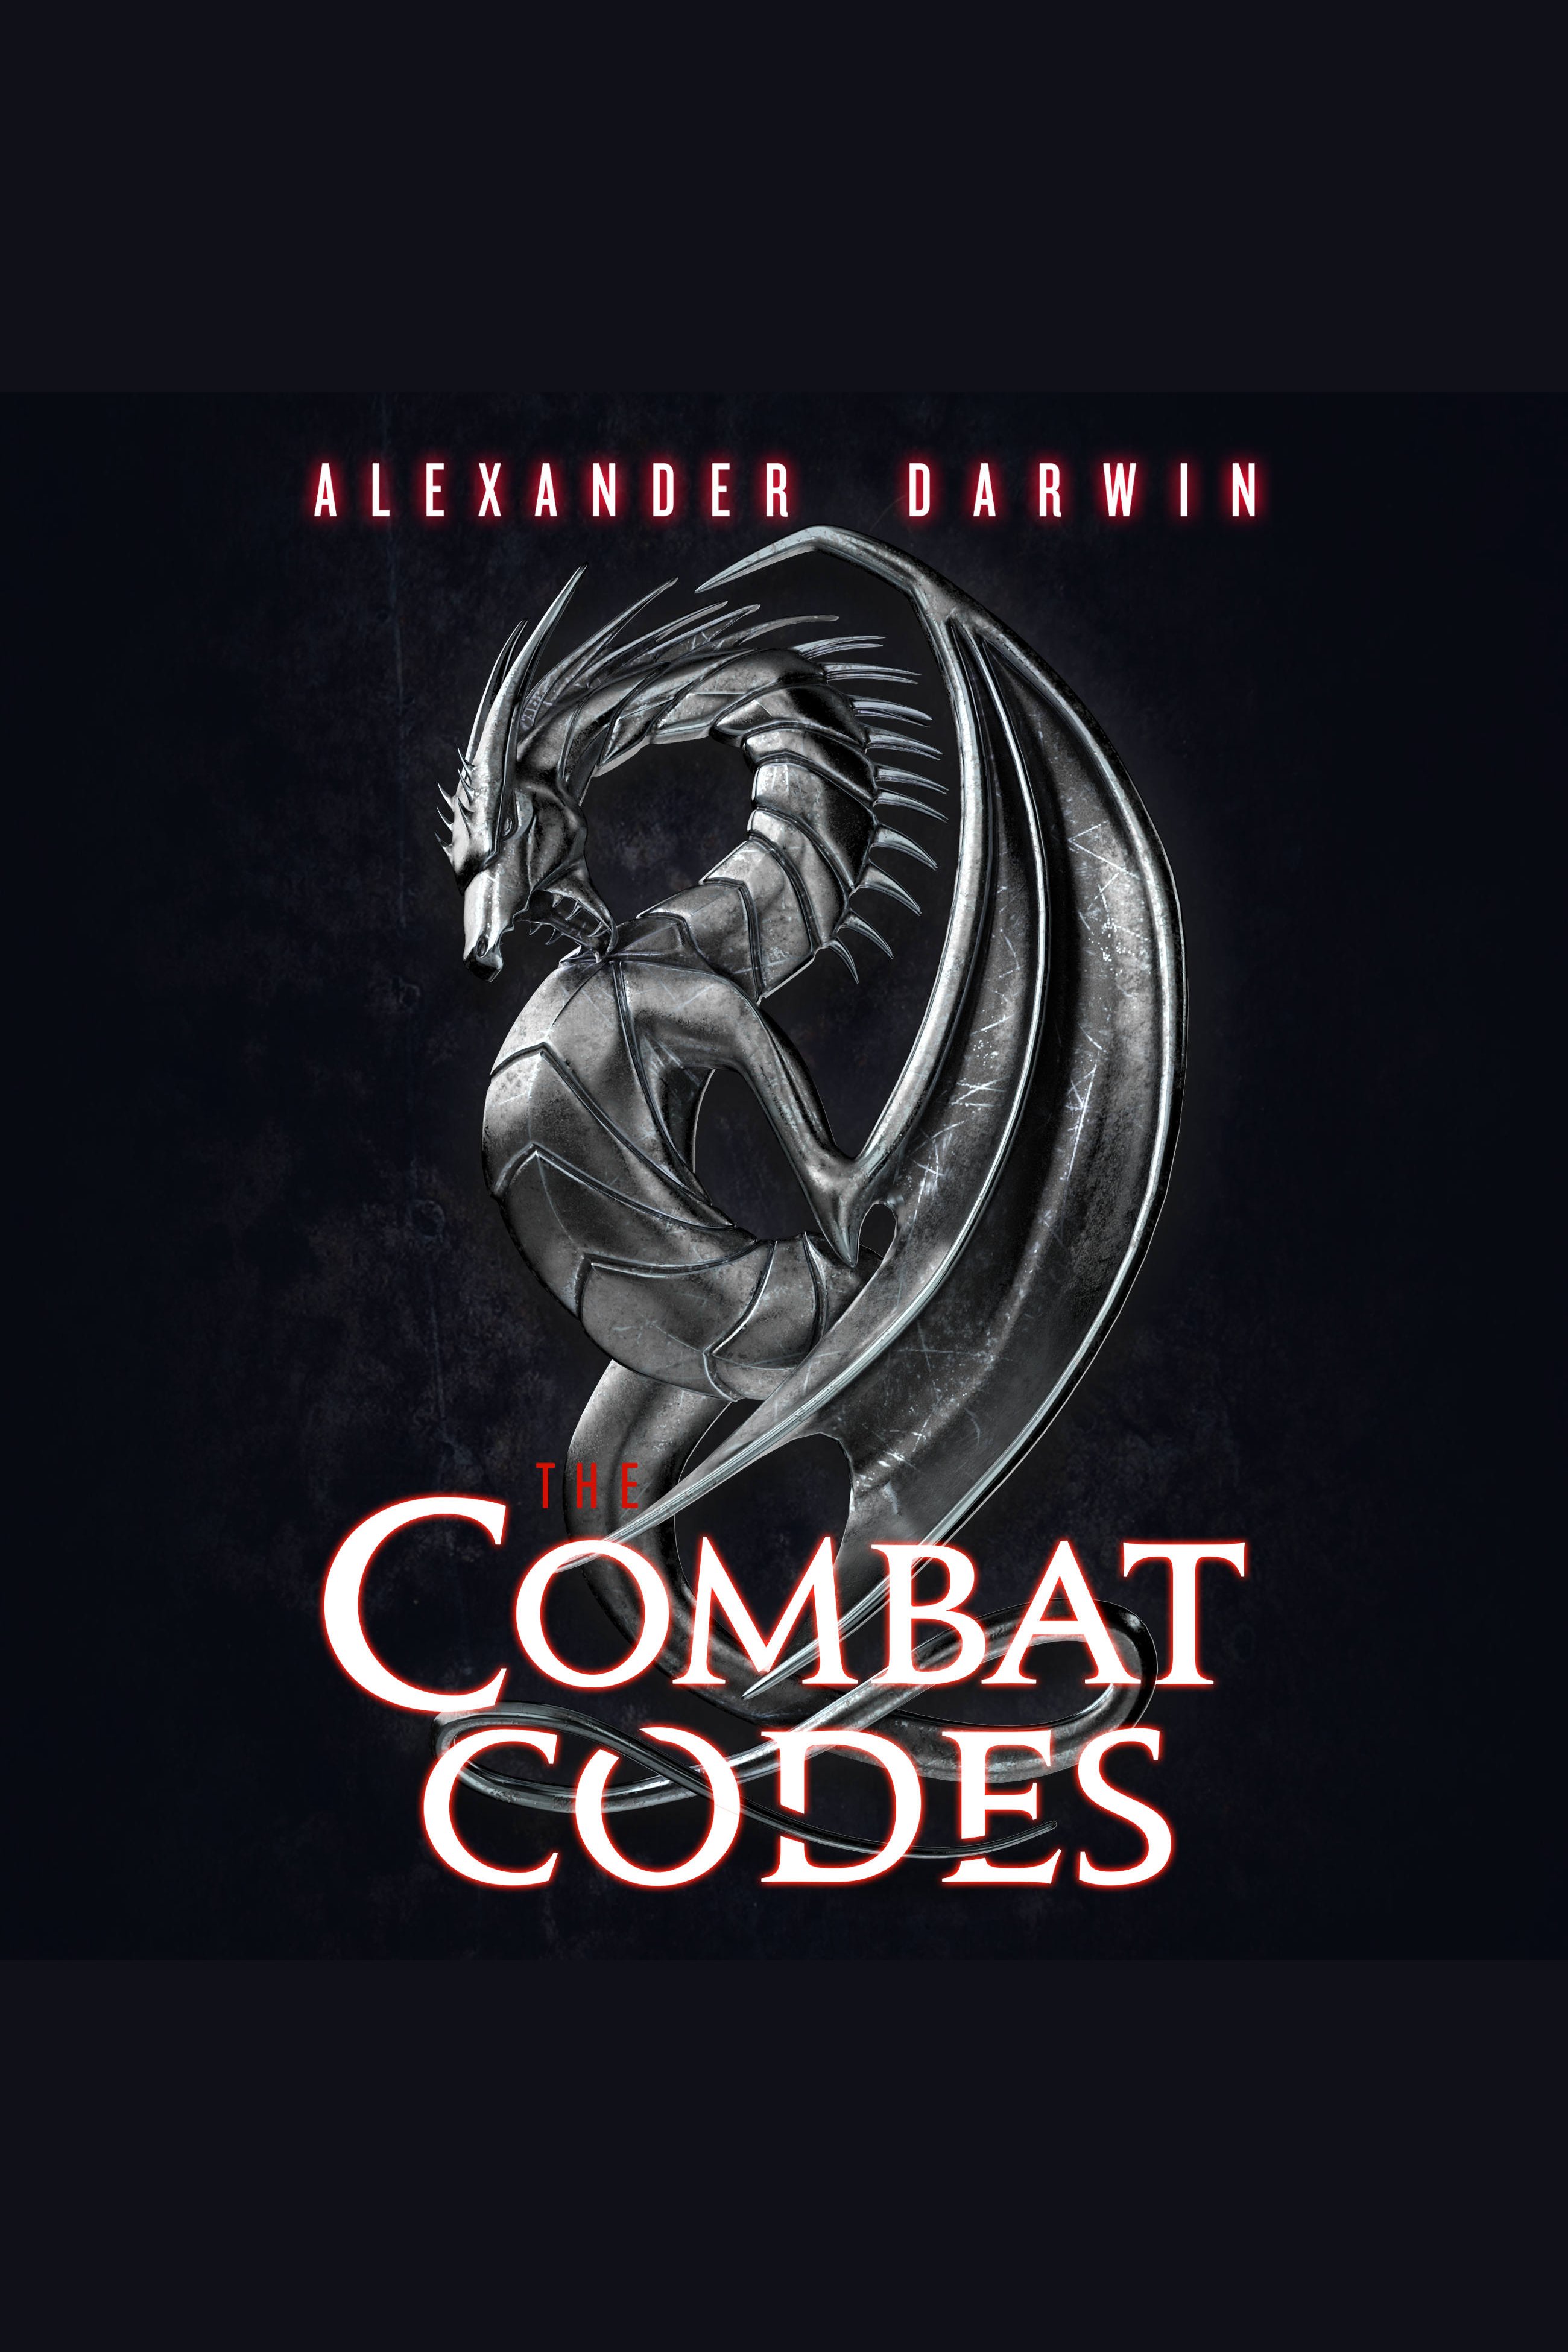 The Combat Codes cover image